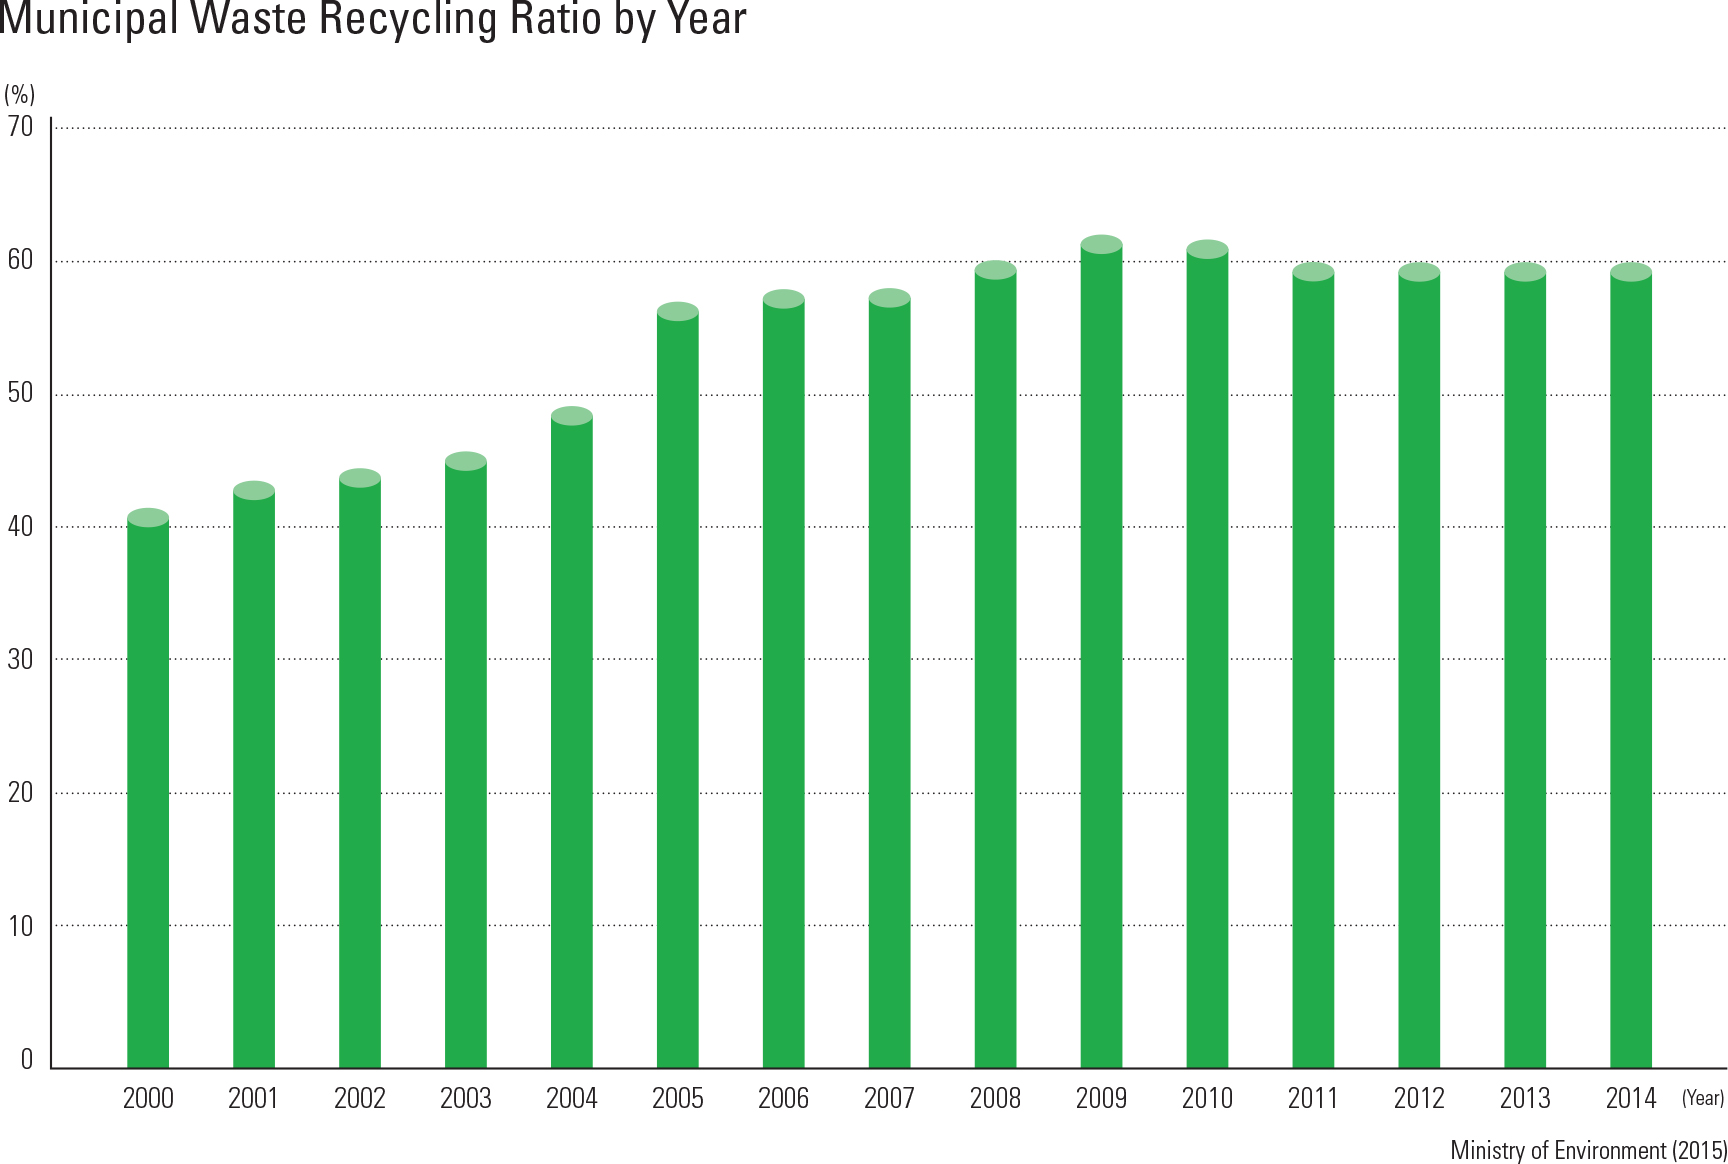 Municipal Waste Recycling Ratio by Year